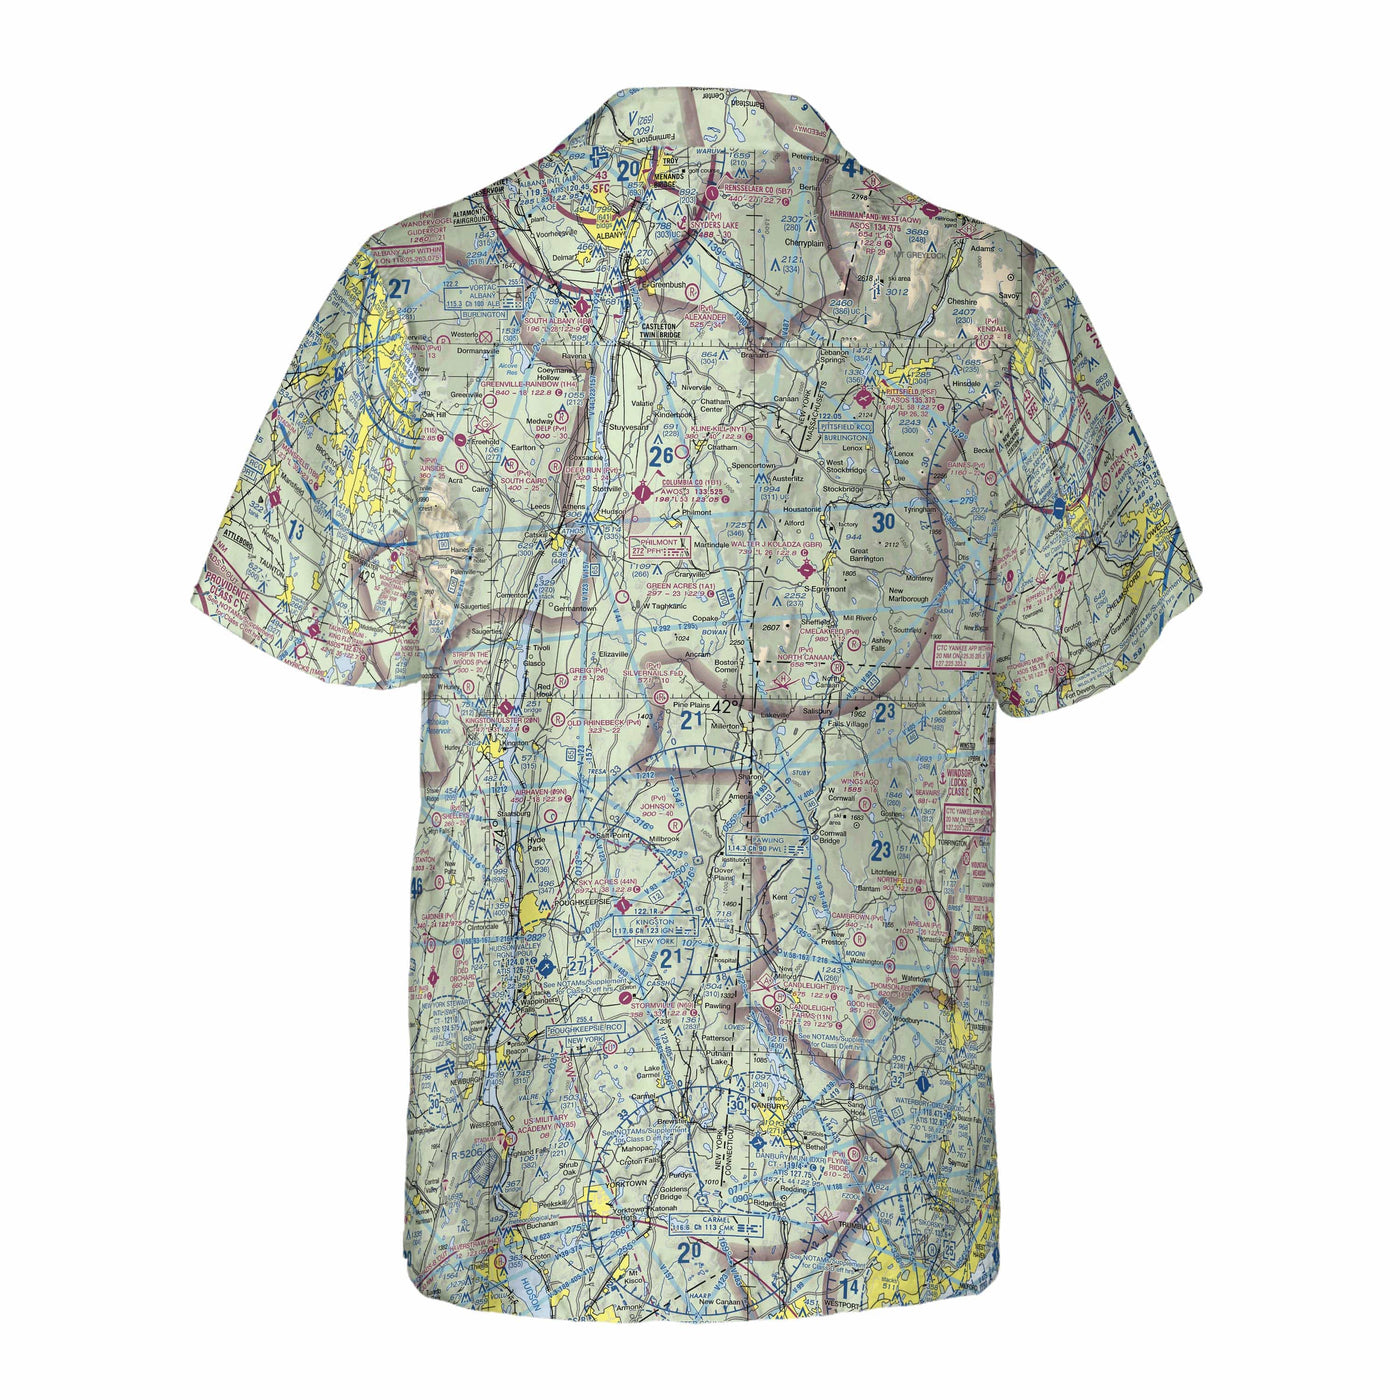 AOP Coconut Button Shirt The Beverly and Boston VFR Coconut Button Camp Shirt